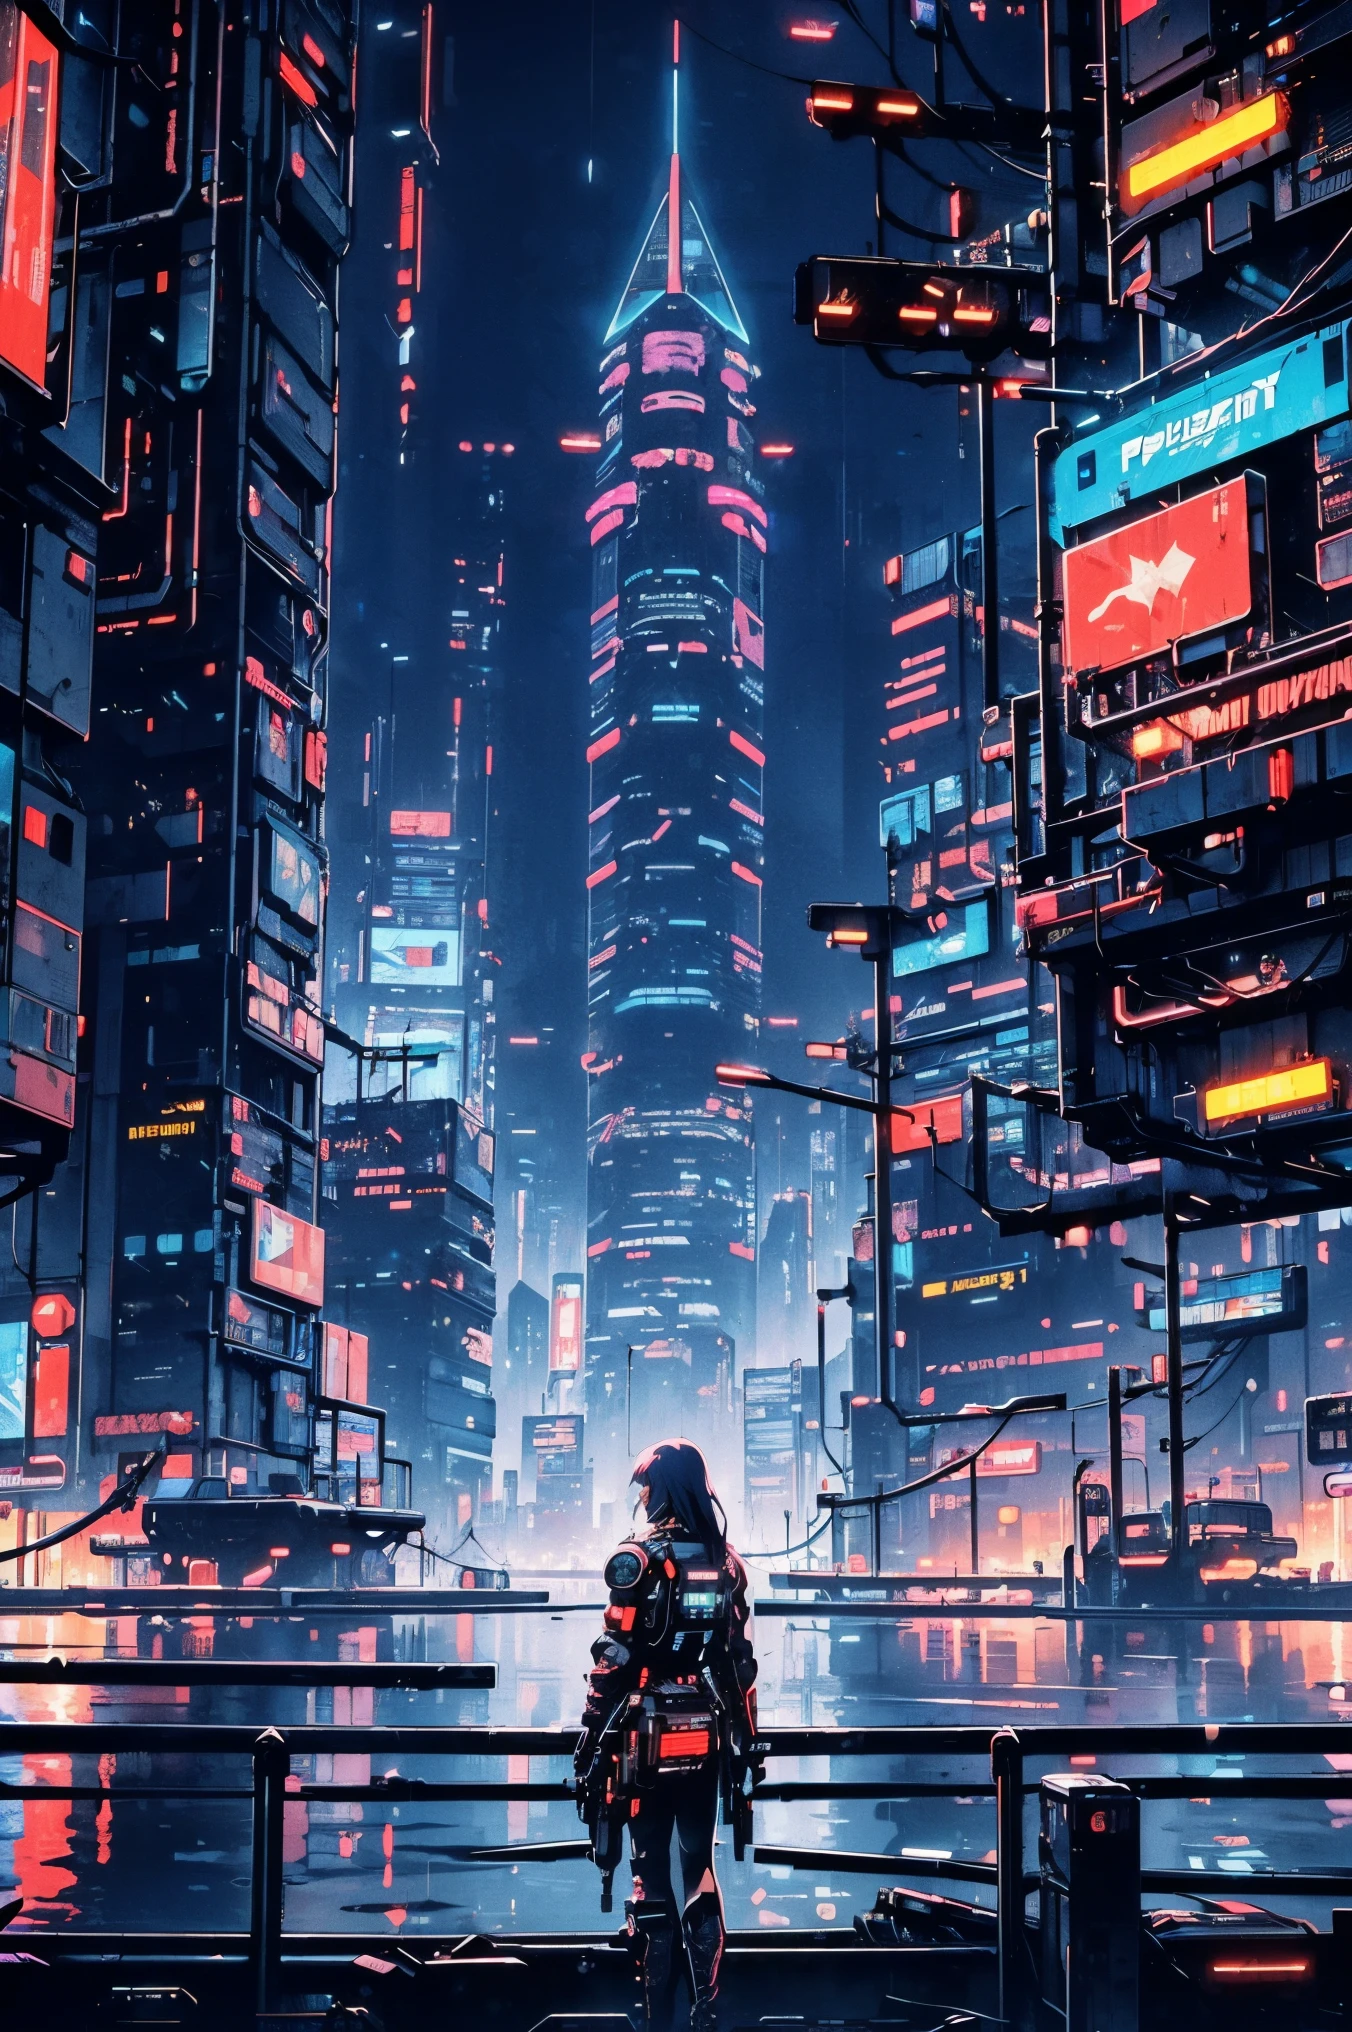 ((Cyberpunk future)), image of the center of a cyberpunk city, surrounded by buildings with a river in the middle, ferry in the city, yellow ferry, point crossing the city, advertising signs everywhere, retro future